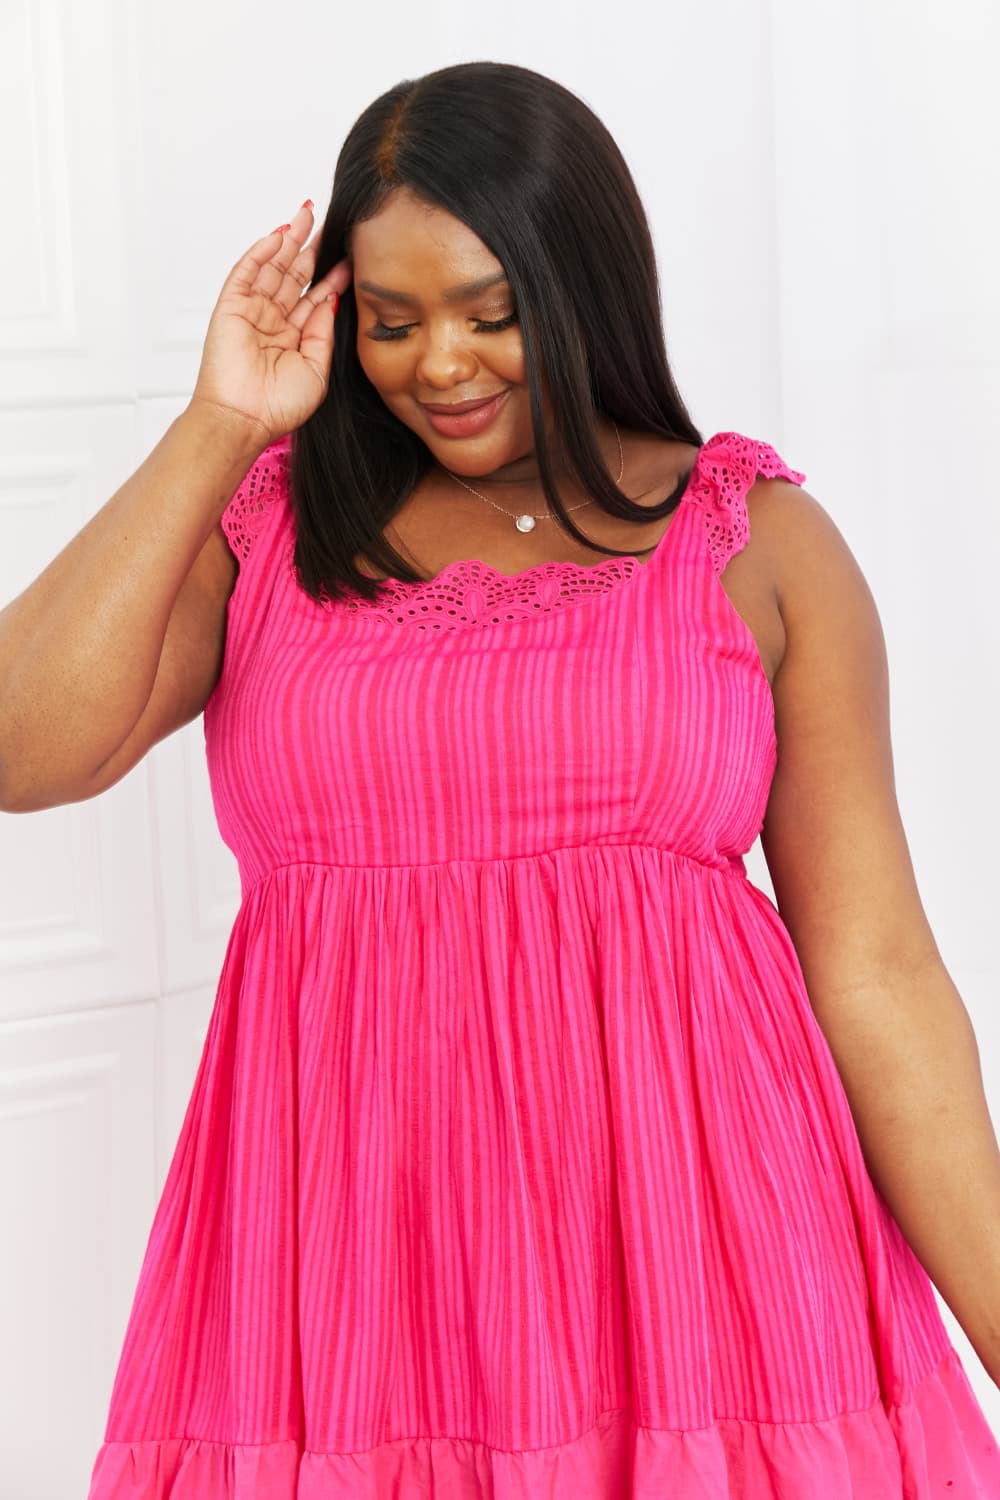 Neon Hot Pink Baby Doll Lace Ruffle Mini Dress (Plus Size Available)